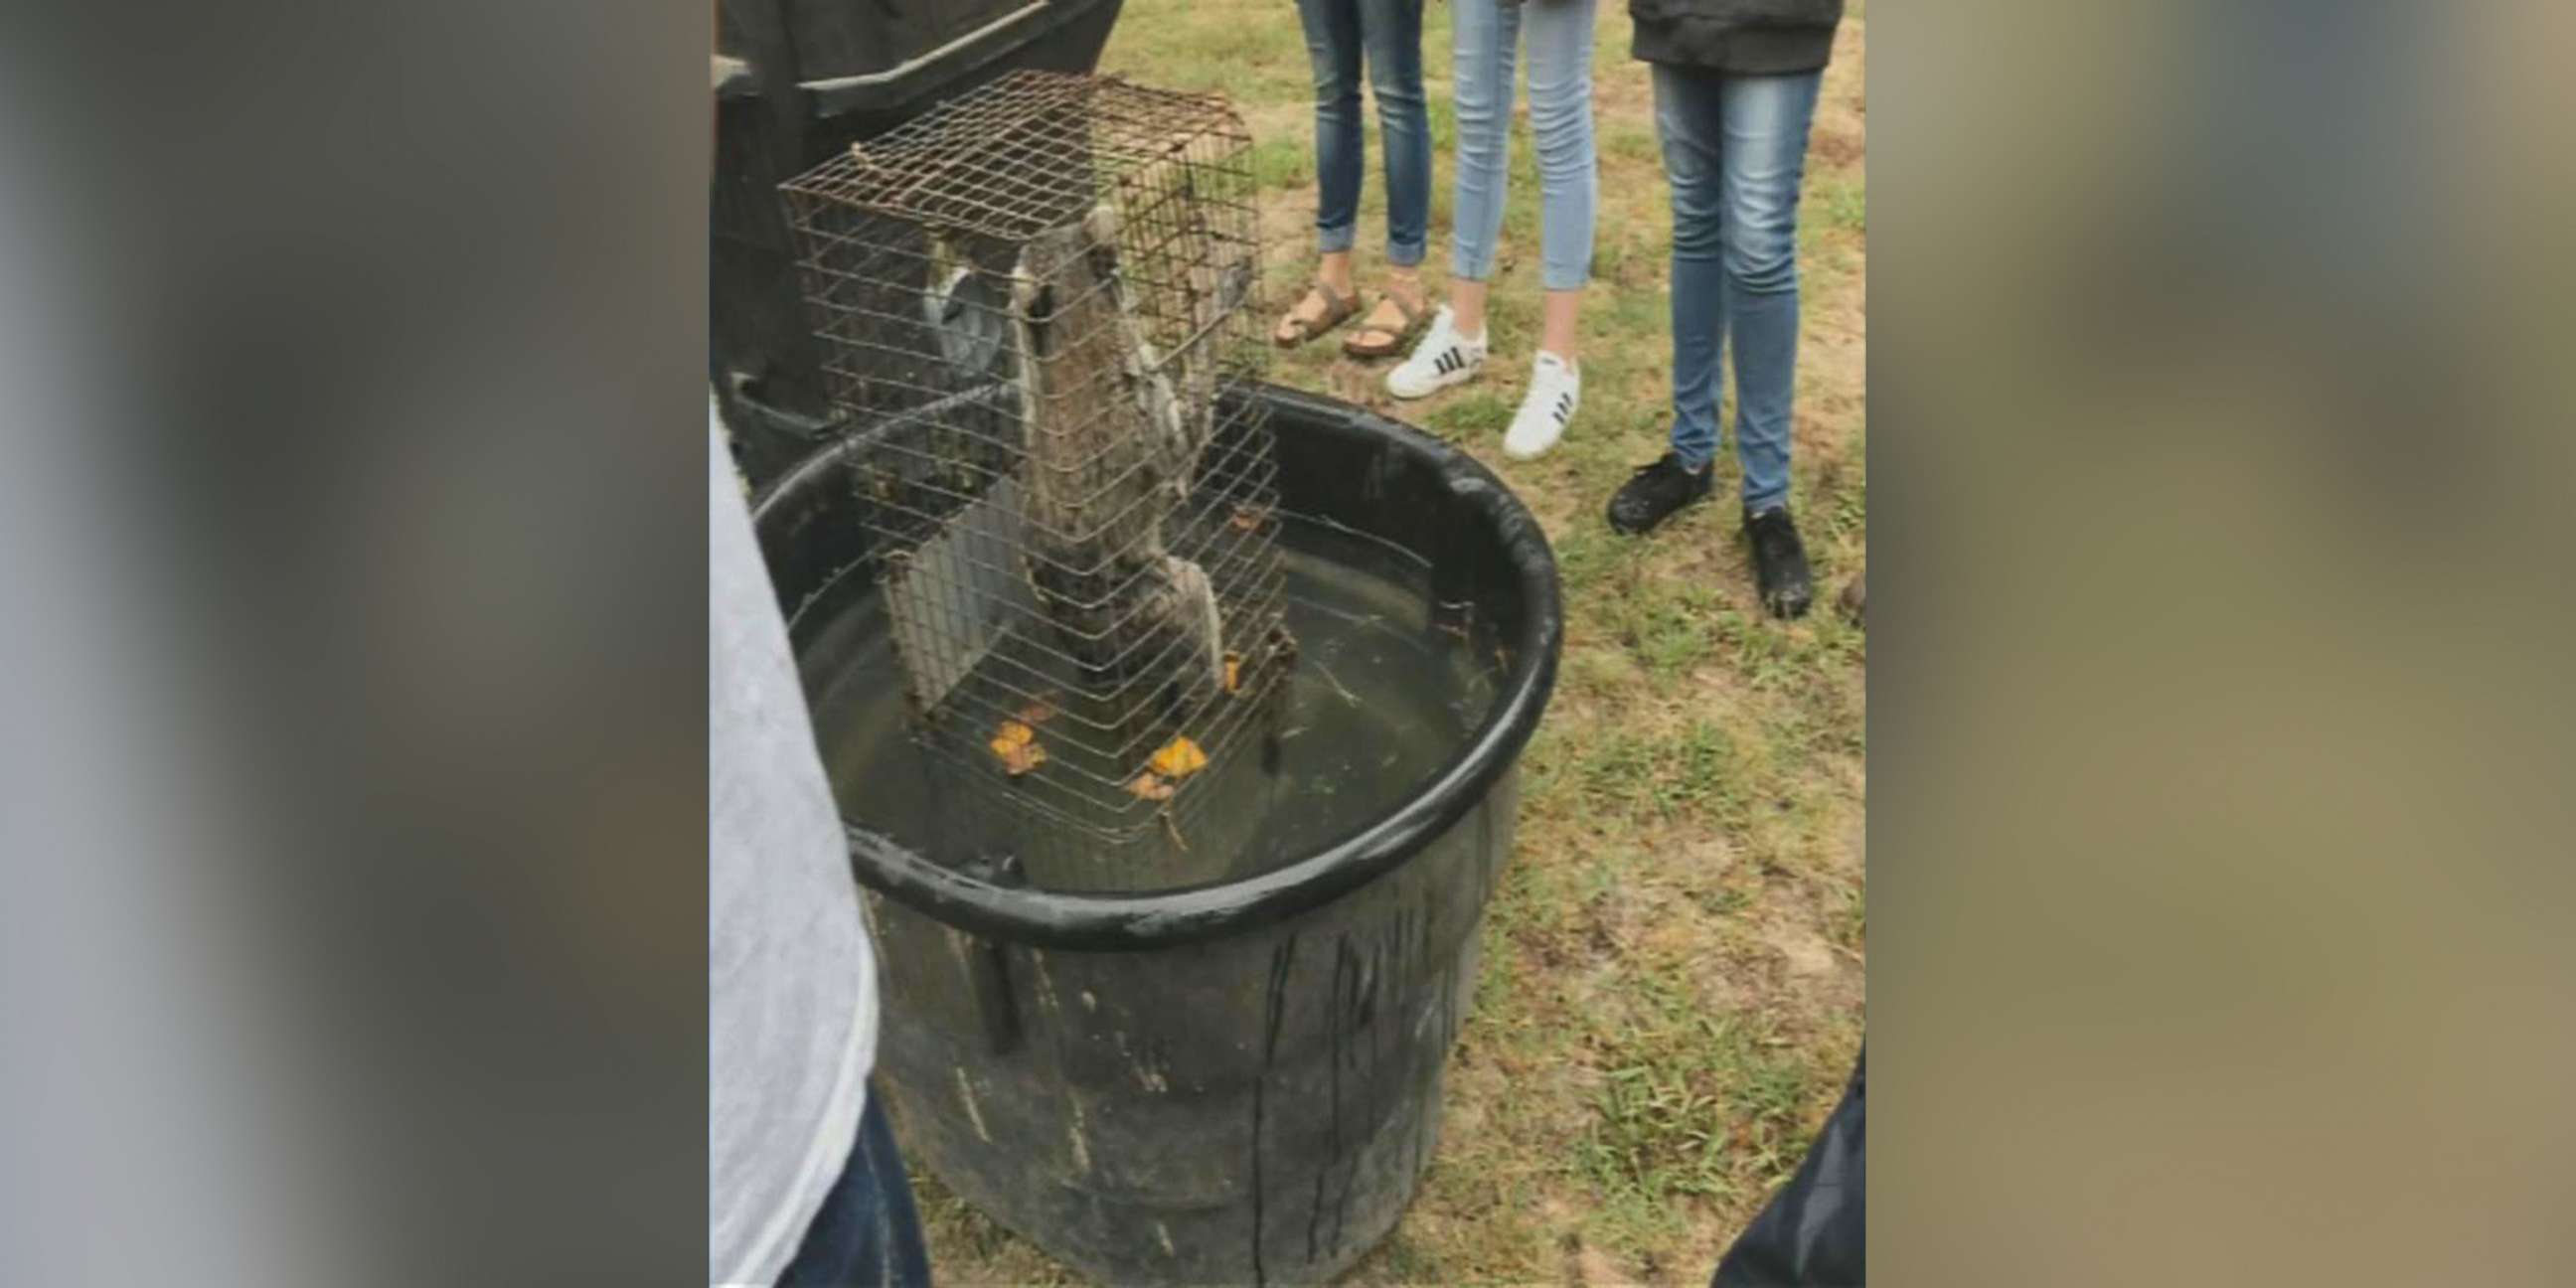 PHOTO: Students at Forest High School in Marion County, Fla., recorded video purporting to show raccoons being drowned in front of an agricultural science class.